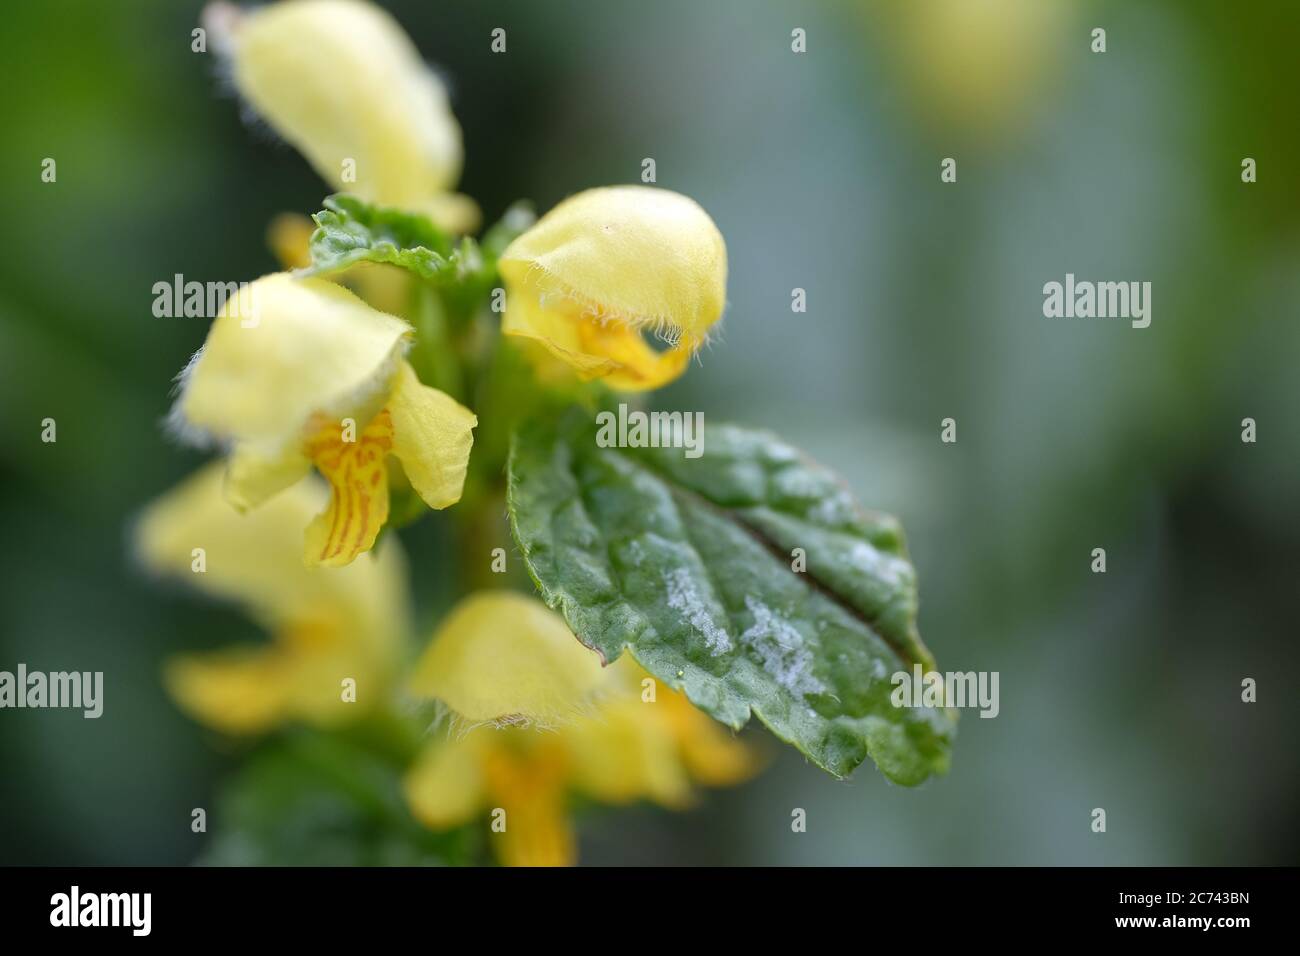 Close up of Yellow Lamium or dead-nettles flowers in a garden. The fine outgrowths or hairs, fine outgrowths on the buds and flowers are clearly visib Stock Photo